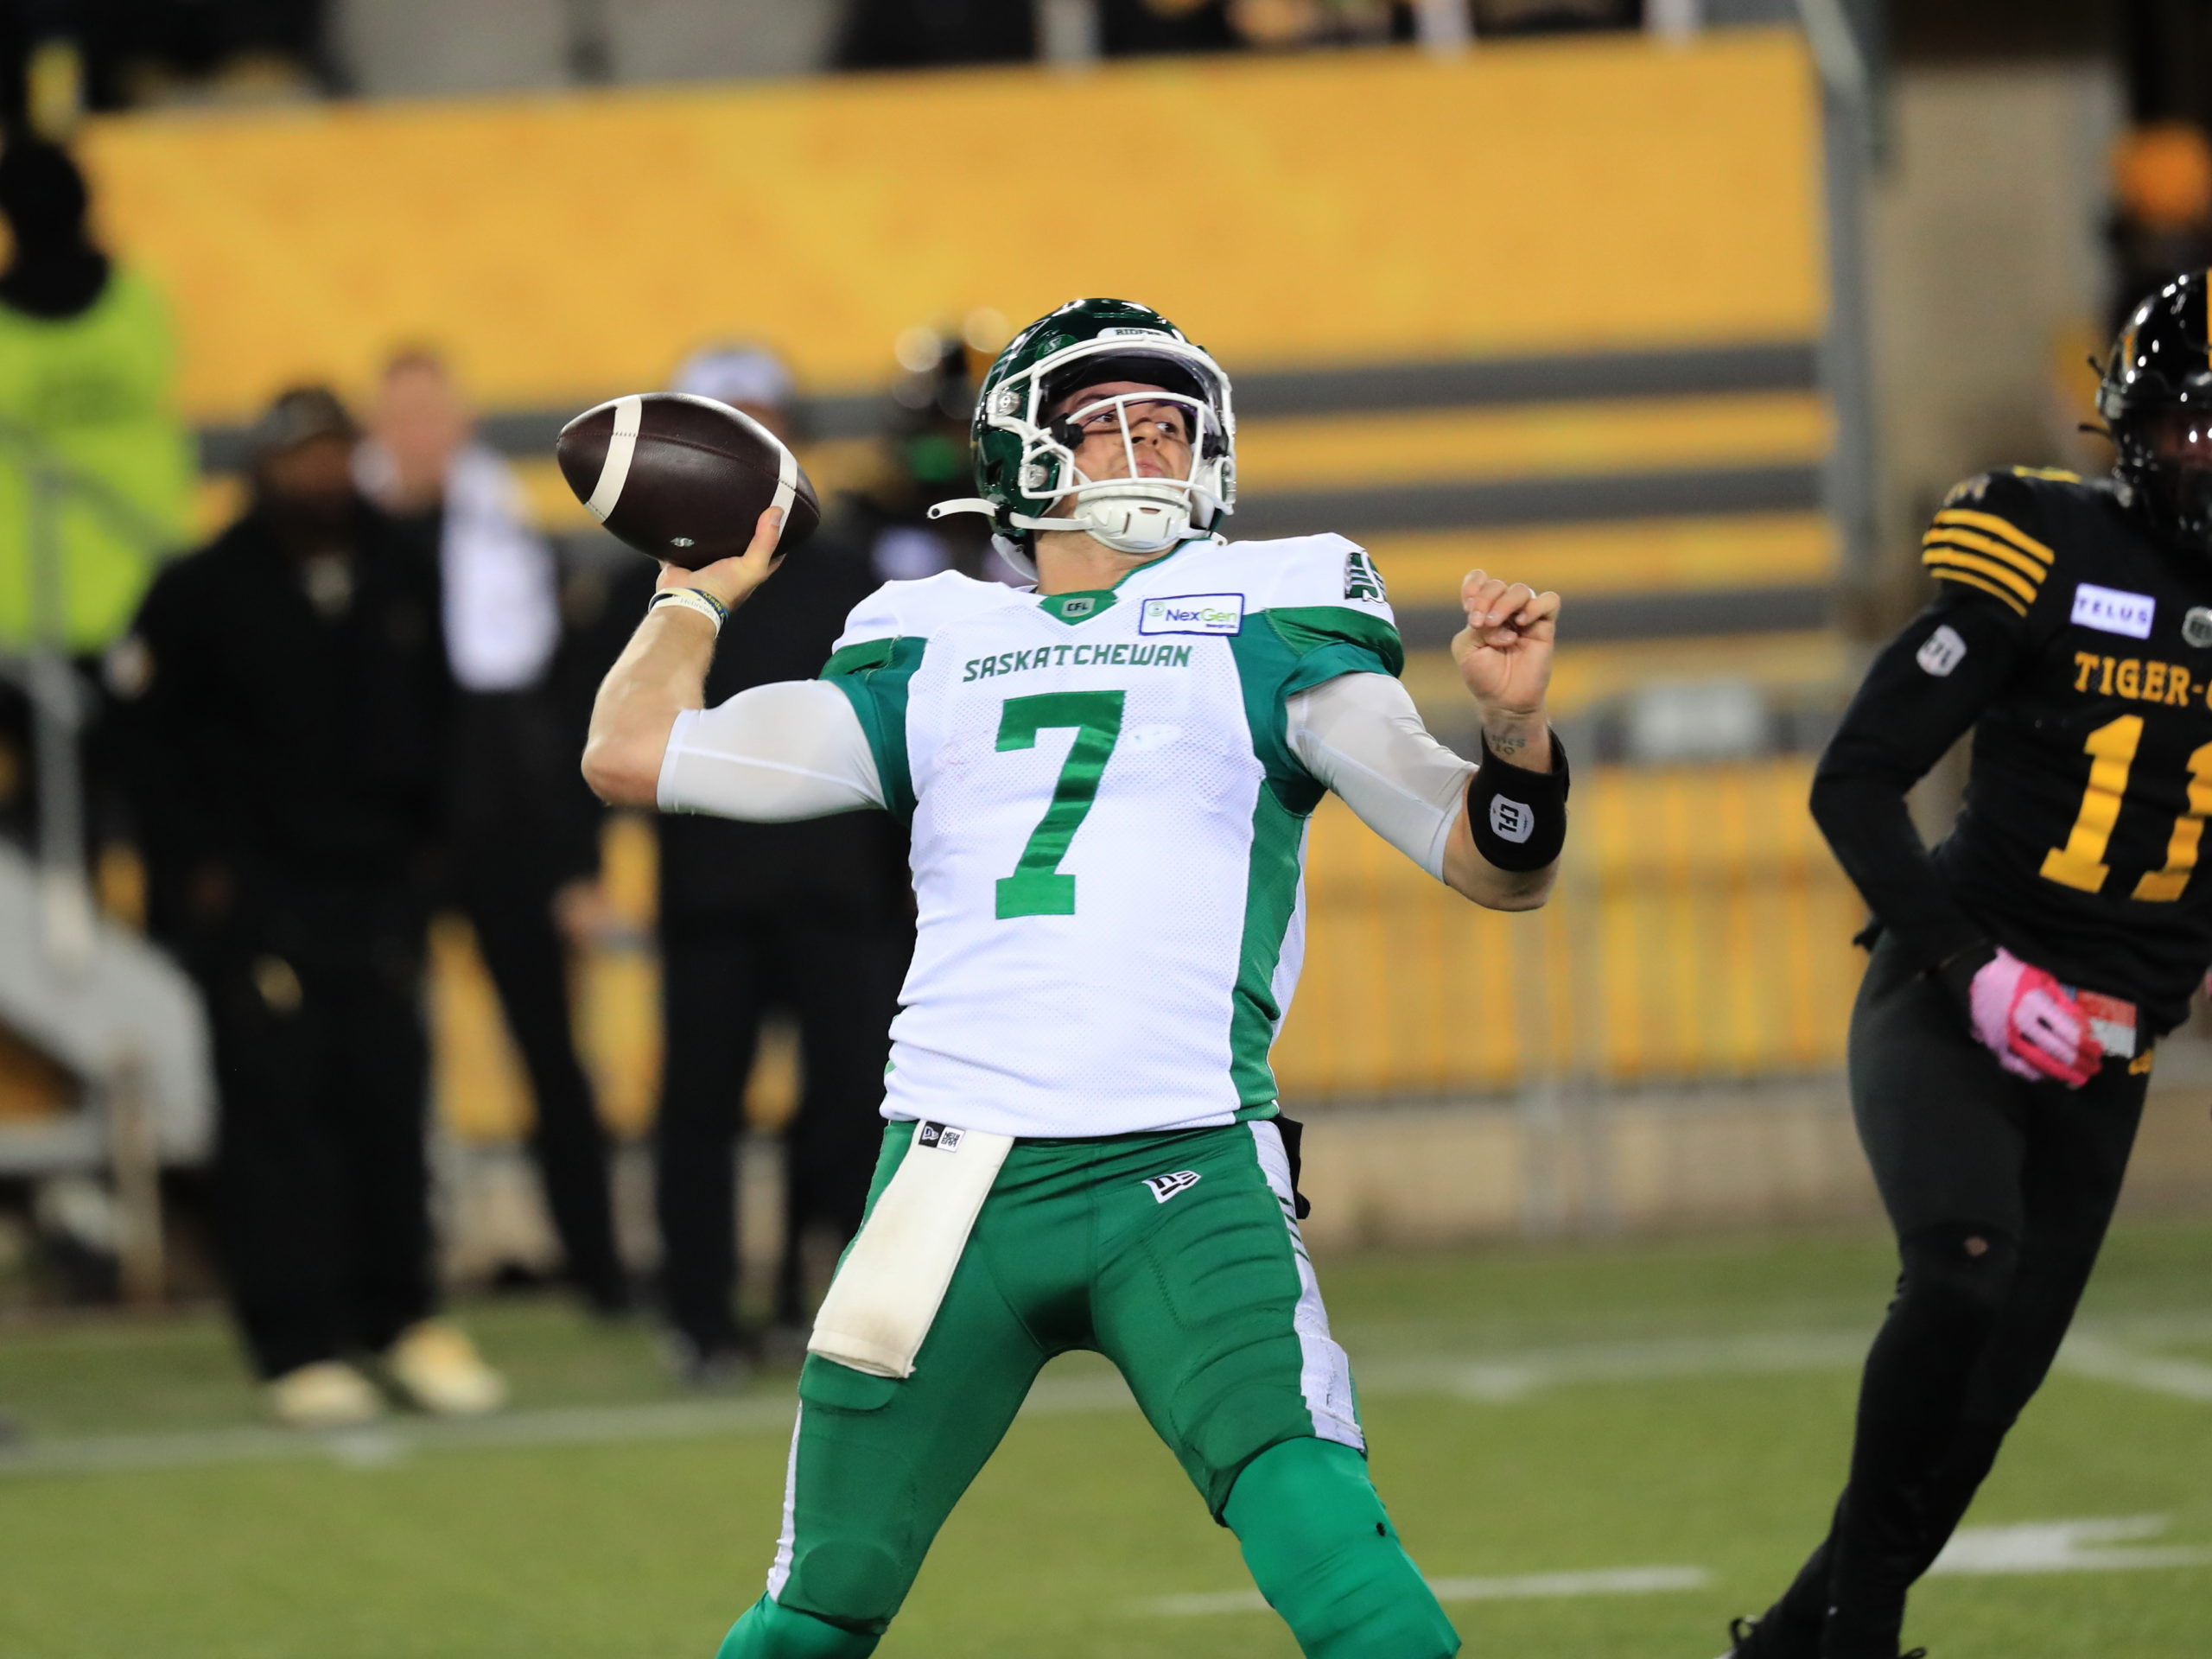 Riders QB Cody Fajardo ponders future after bench: 'Hope there's someone out there who might still want me' - 3DownNation